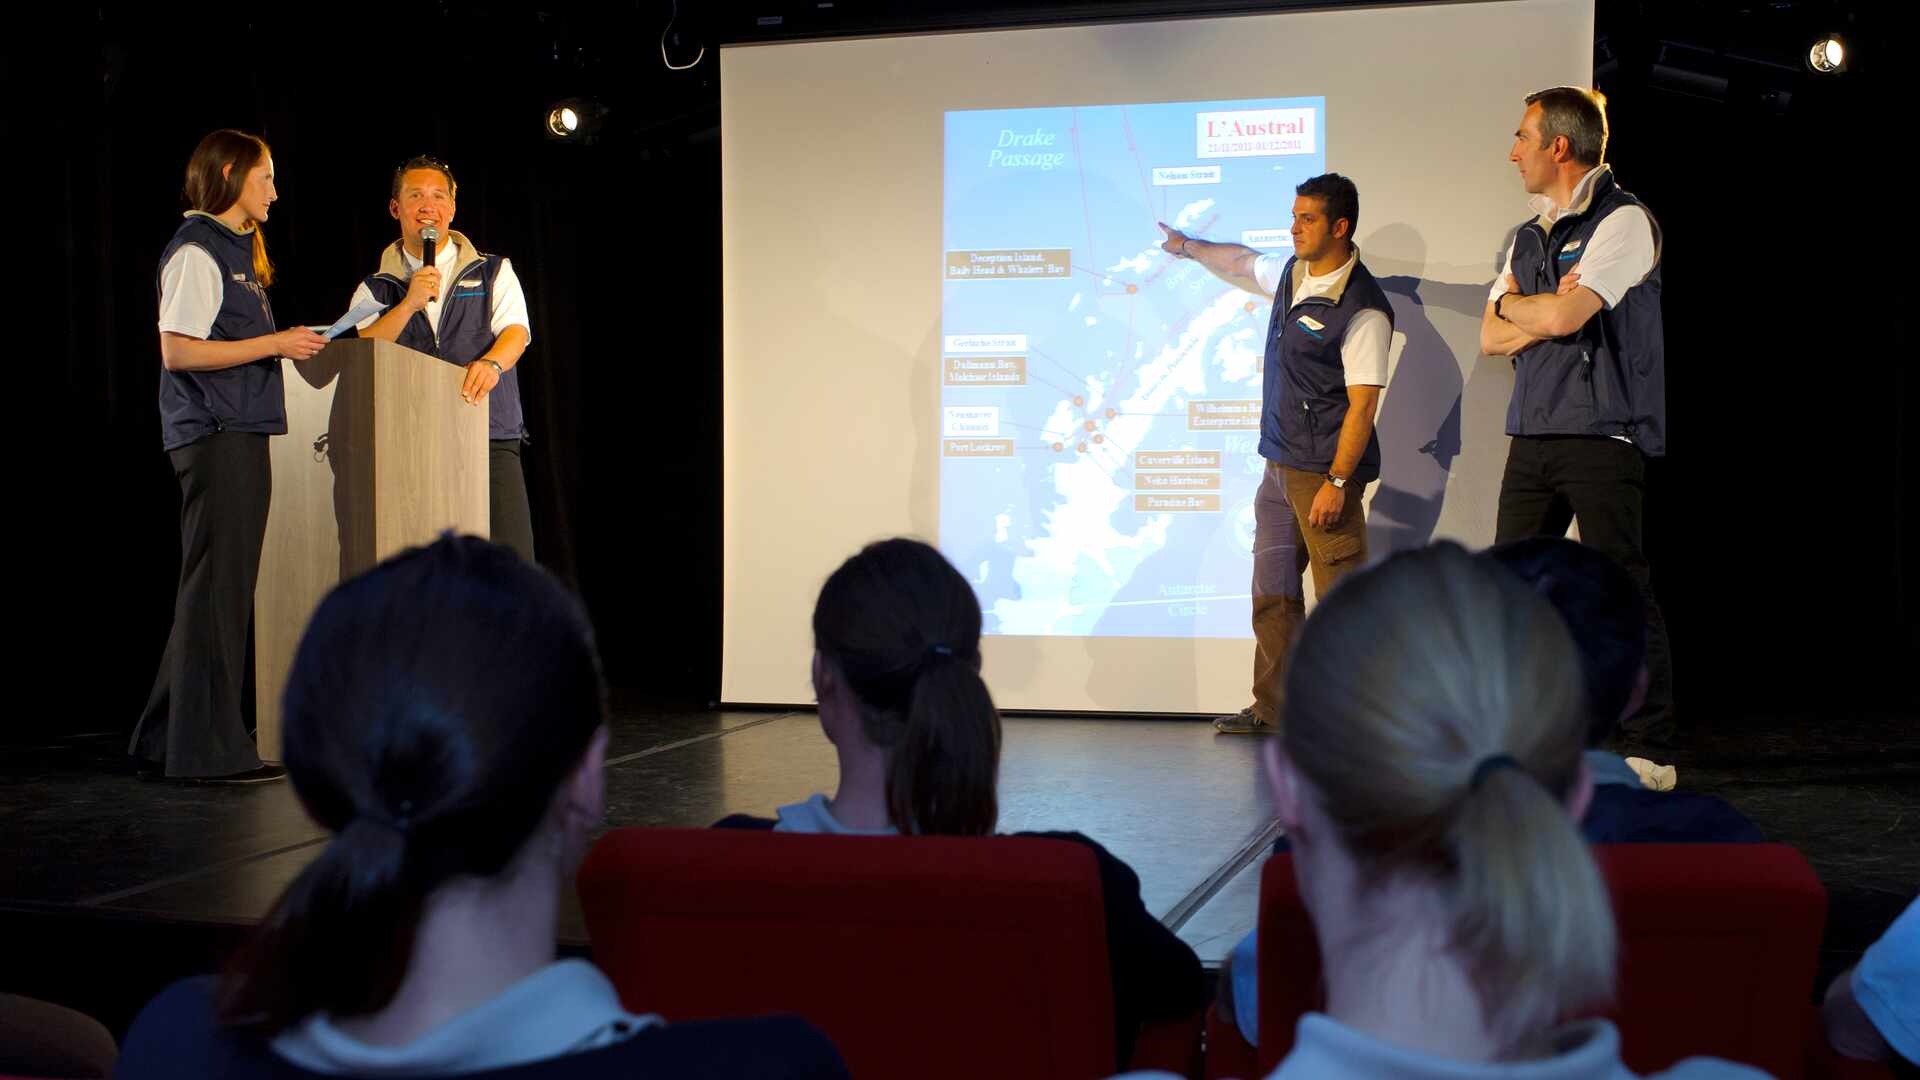 cruise operators and staff on a stage giving a presentation to an audience